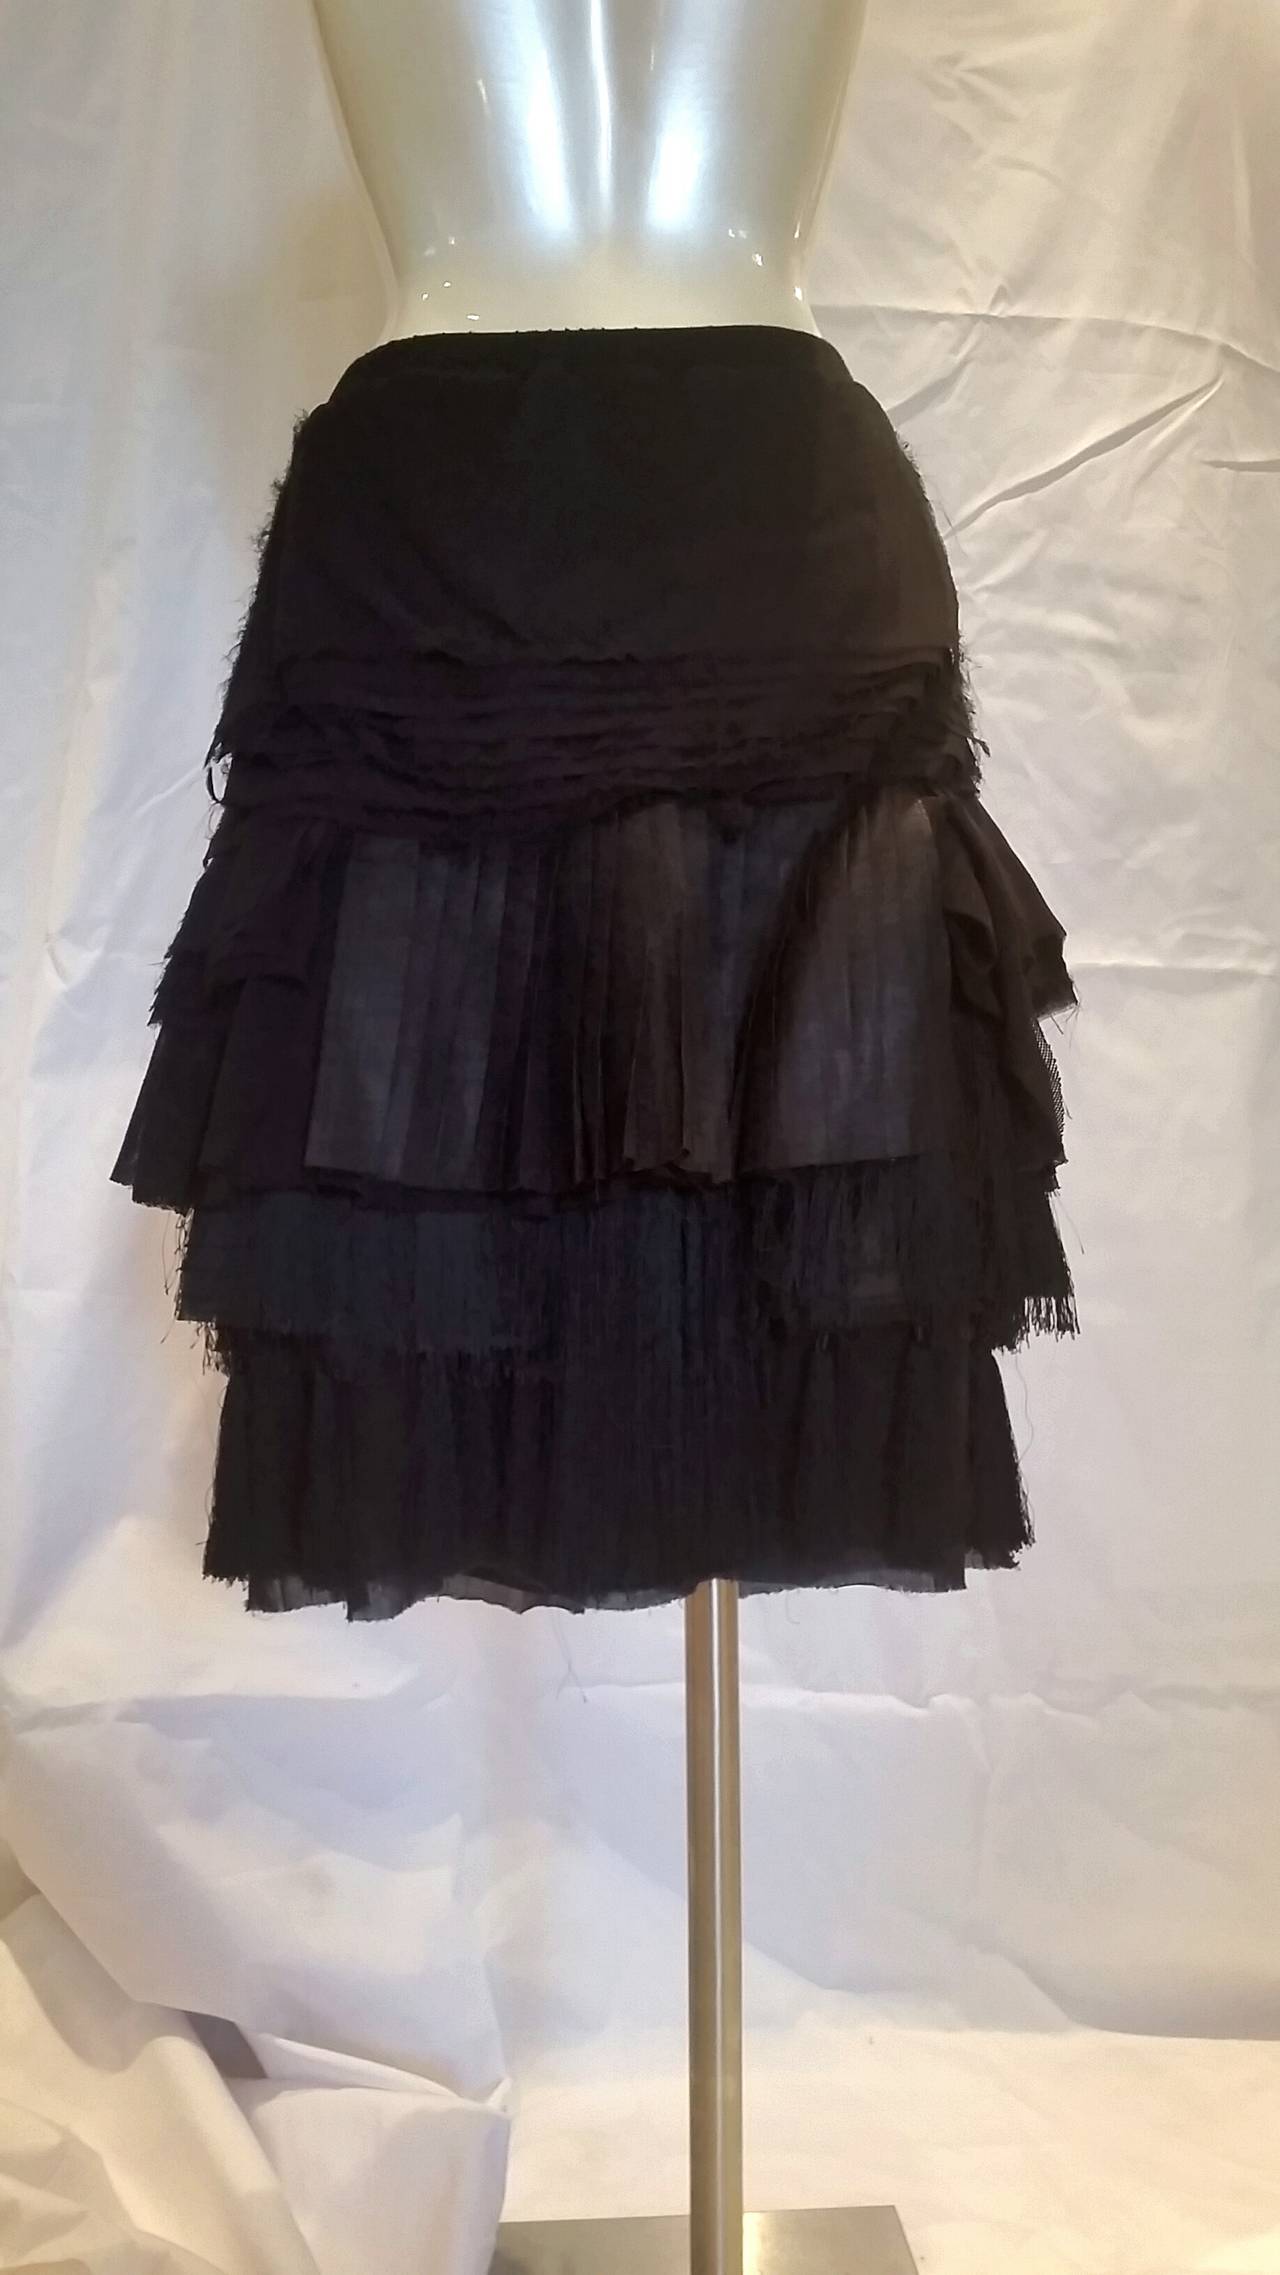 1990s Givenchy vintage black Skirt with fringes. Still with Original Tags
100% cotton